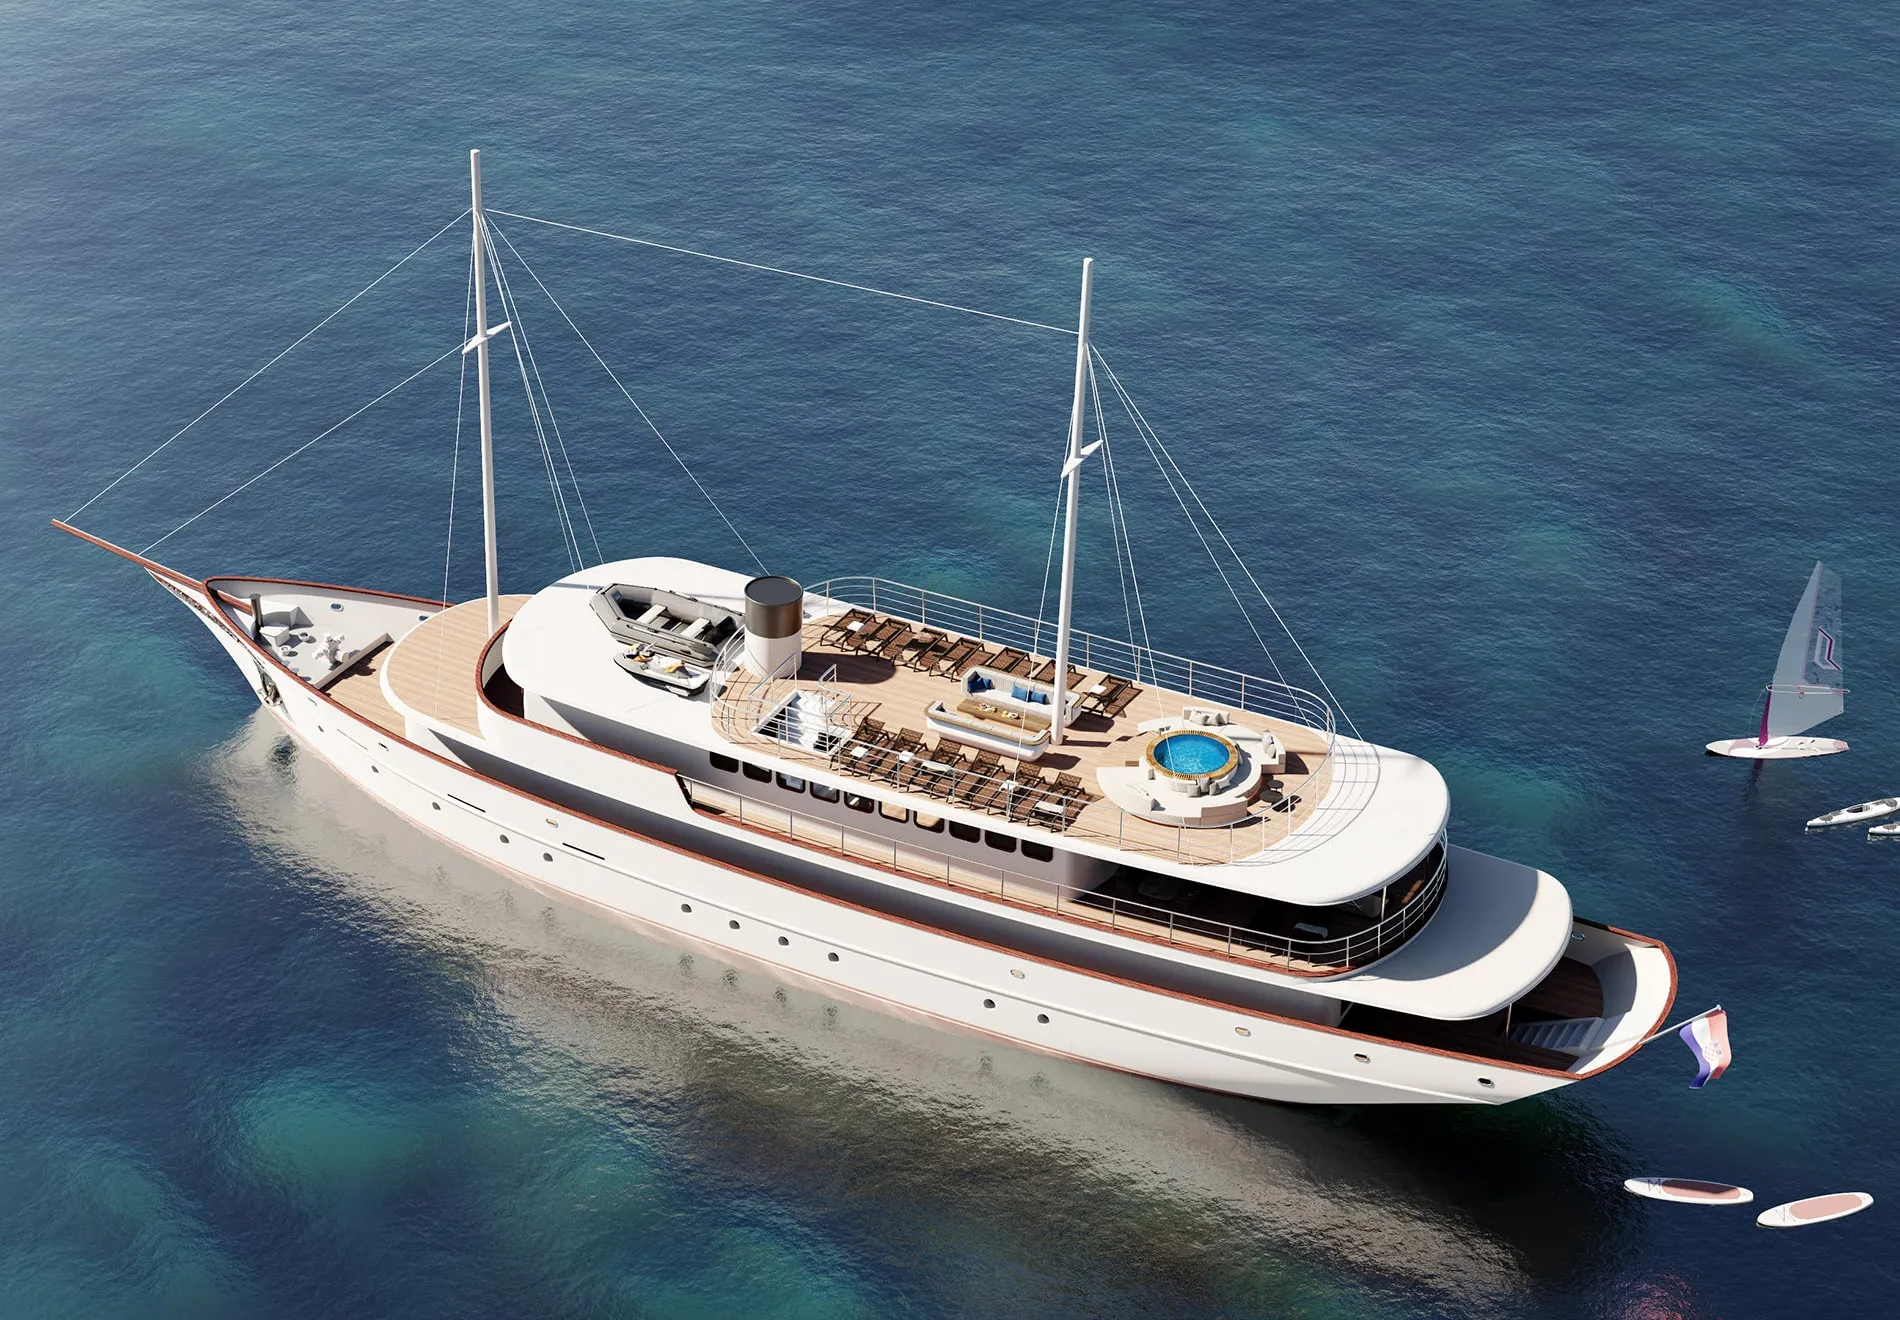 Can you describe the unique features and amenities that set your luxury yacht apart from others in the region